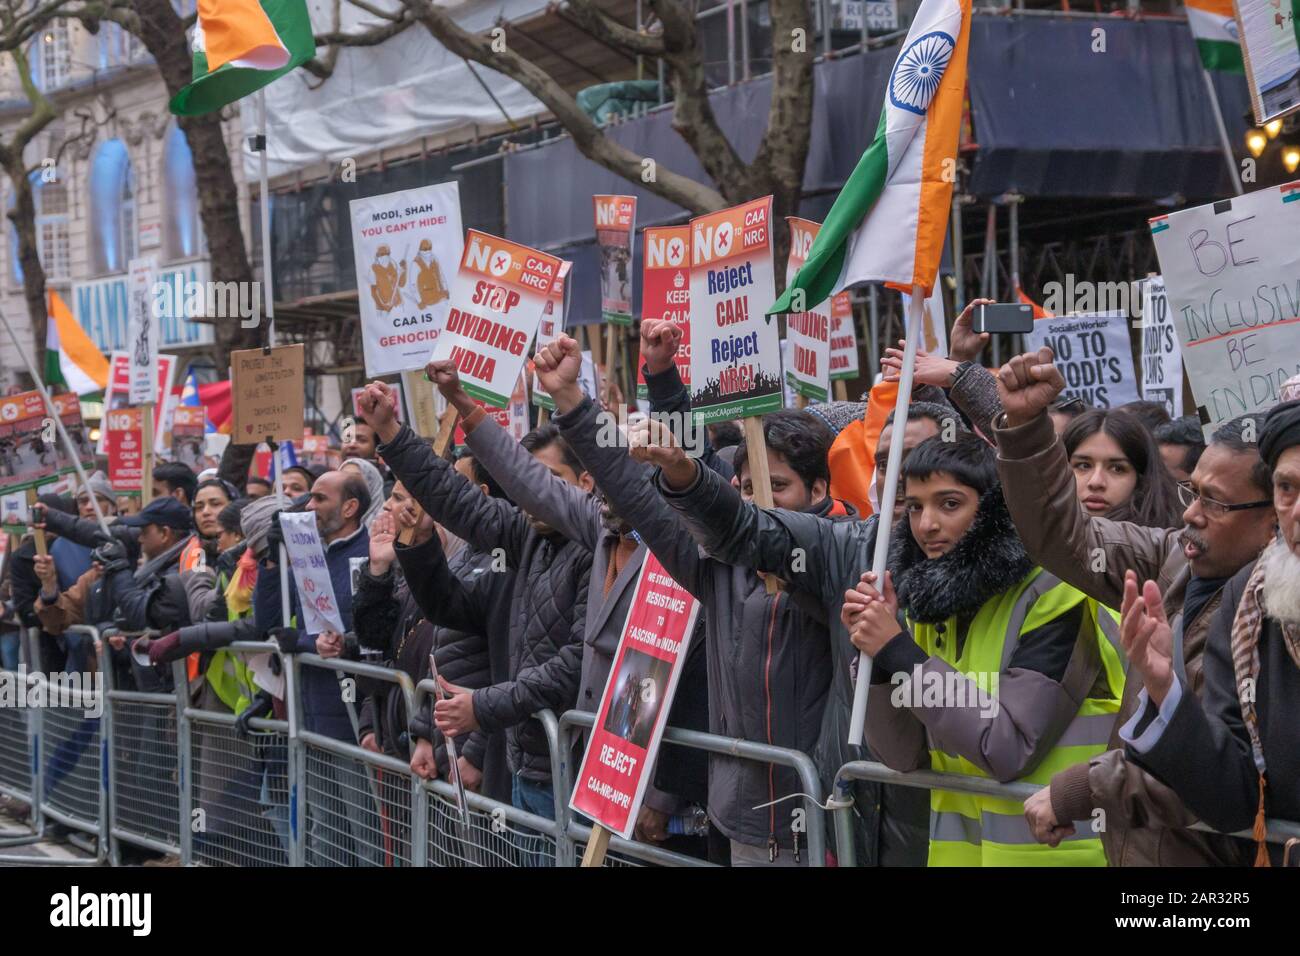 London, UK. 25th January 2020. People  behind barriers opposite the Indian High Commission raise their fists after singing the Indian National Anthem. They call for India to respect its secular constitution which calls for justice, liberty, equality and fraternity at the end of the protest against the Citizenship (Amendment) Act of the Hindu fascist Modi regime which has prompted horrific state and far-right violence with Muslim neighbourhoods and homes have been invaded by the police and fascist mobs, young men murdered, women, children and elderly people beaten up and tortured and property d Stock Photo